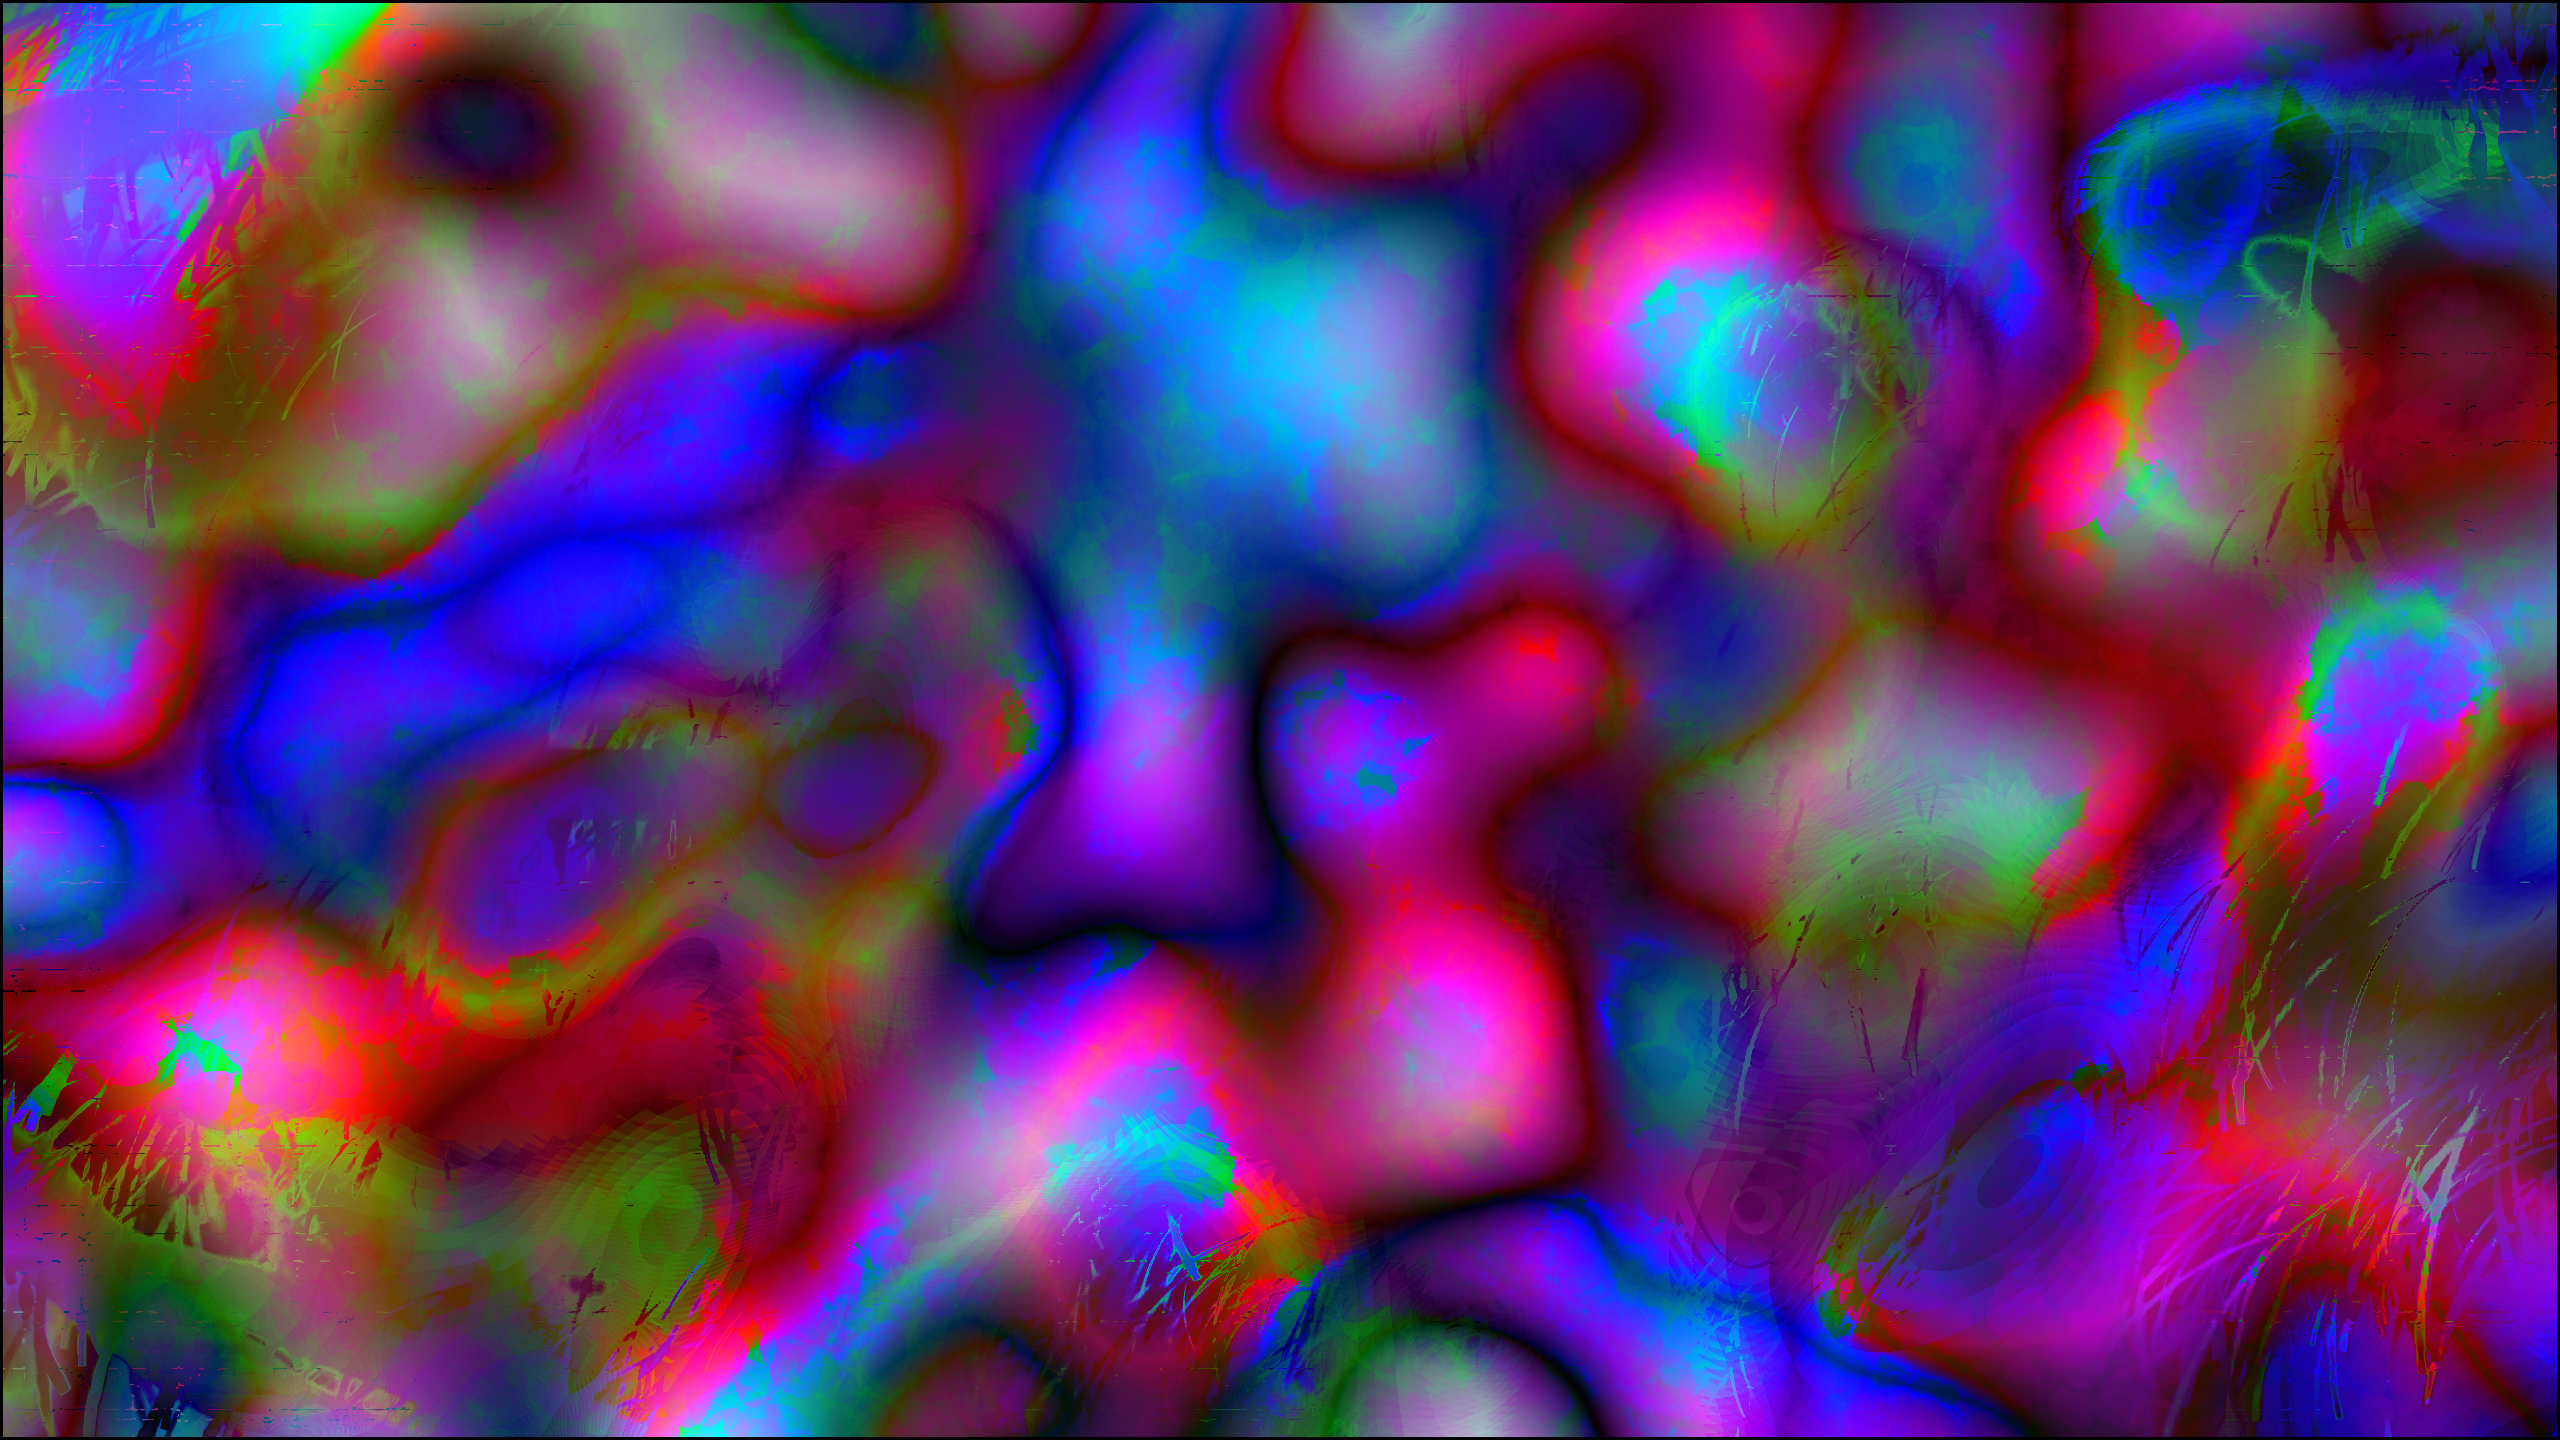 Abstract Trippy Melting Bright Colorful 2560x1440